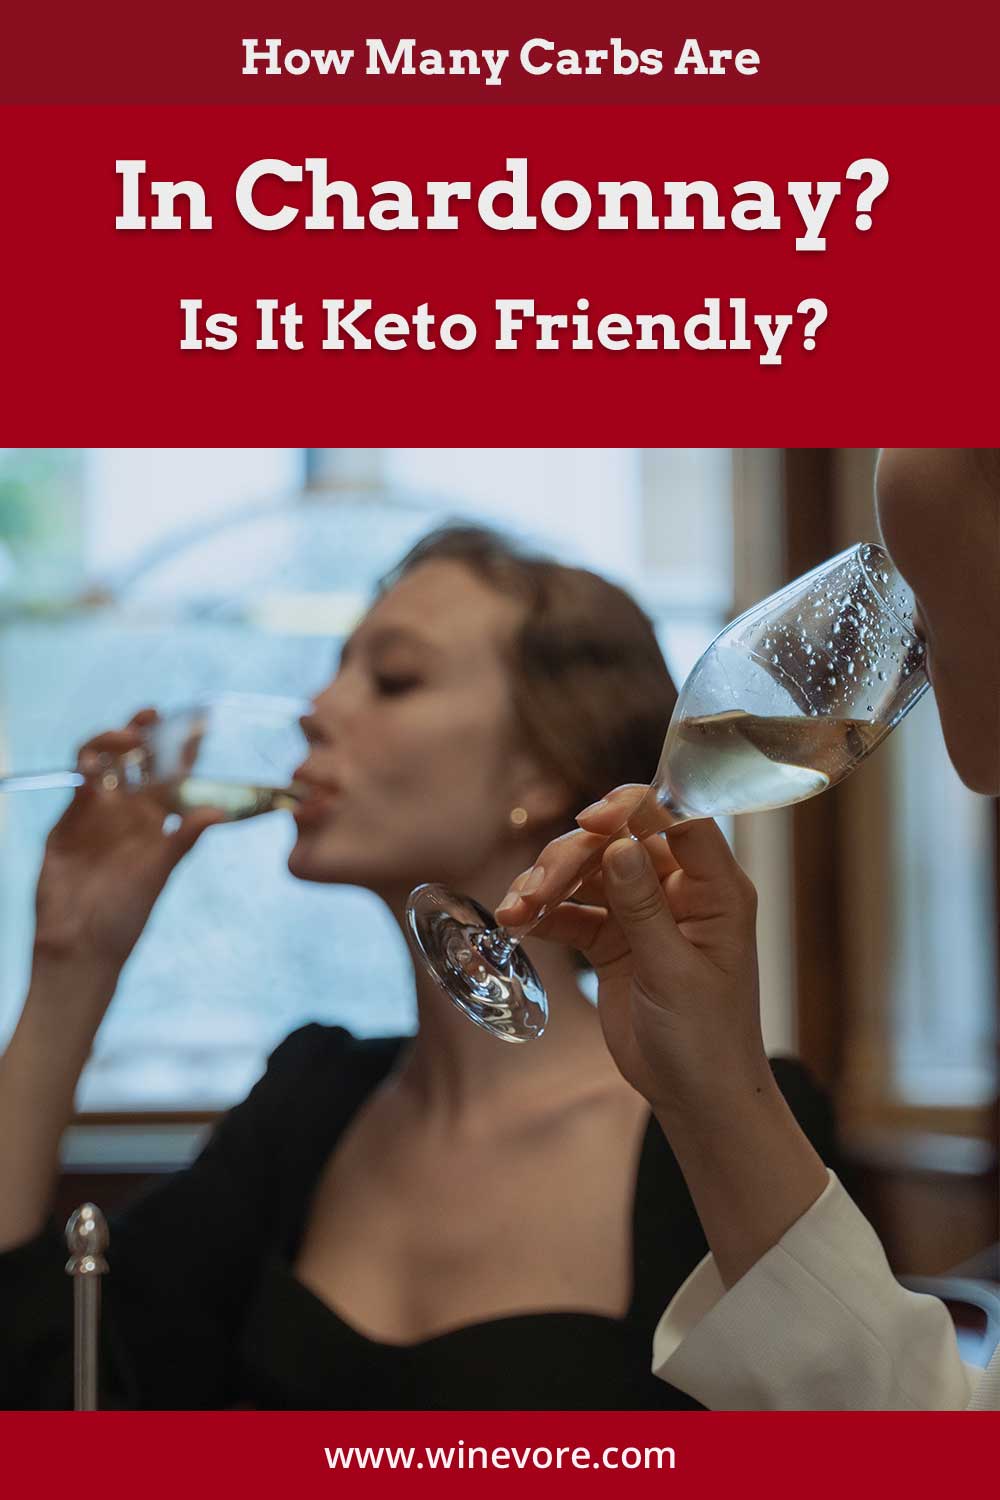 2 person drinking wine - How Many Carbs Are In Chardonnay? Is It Keto Friendly?